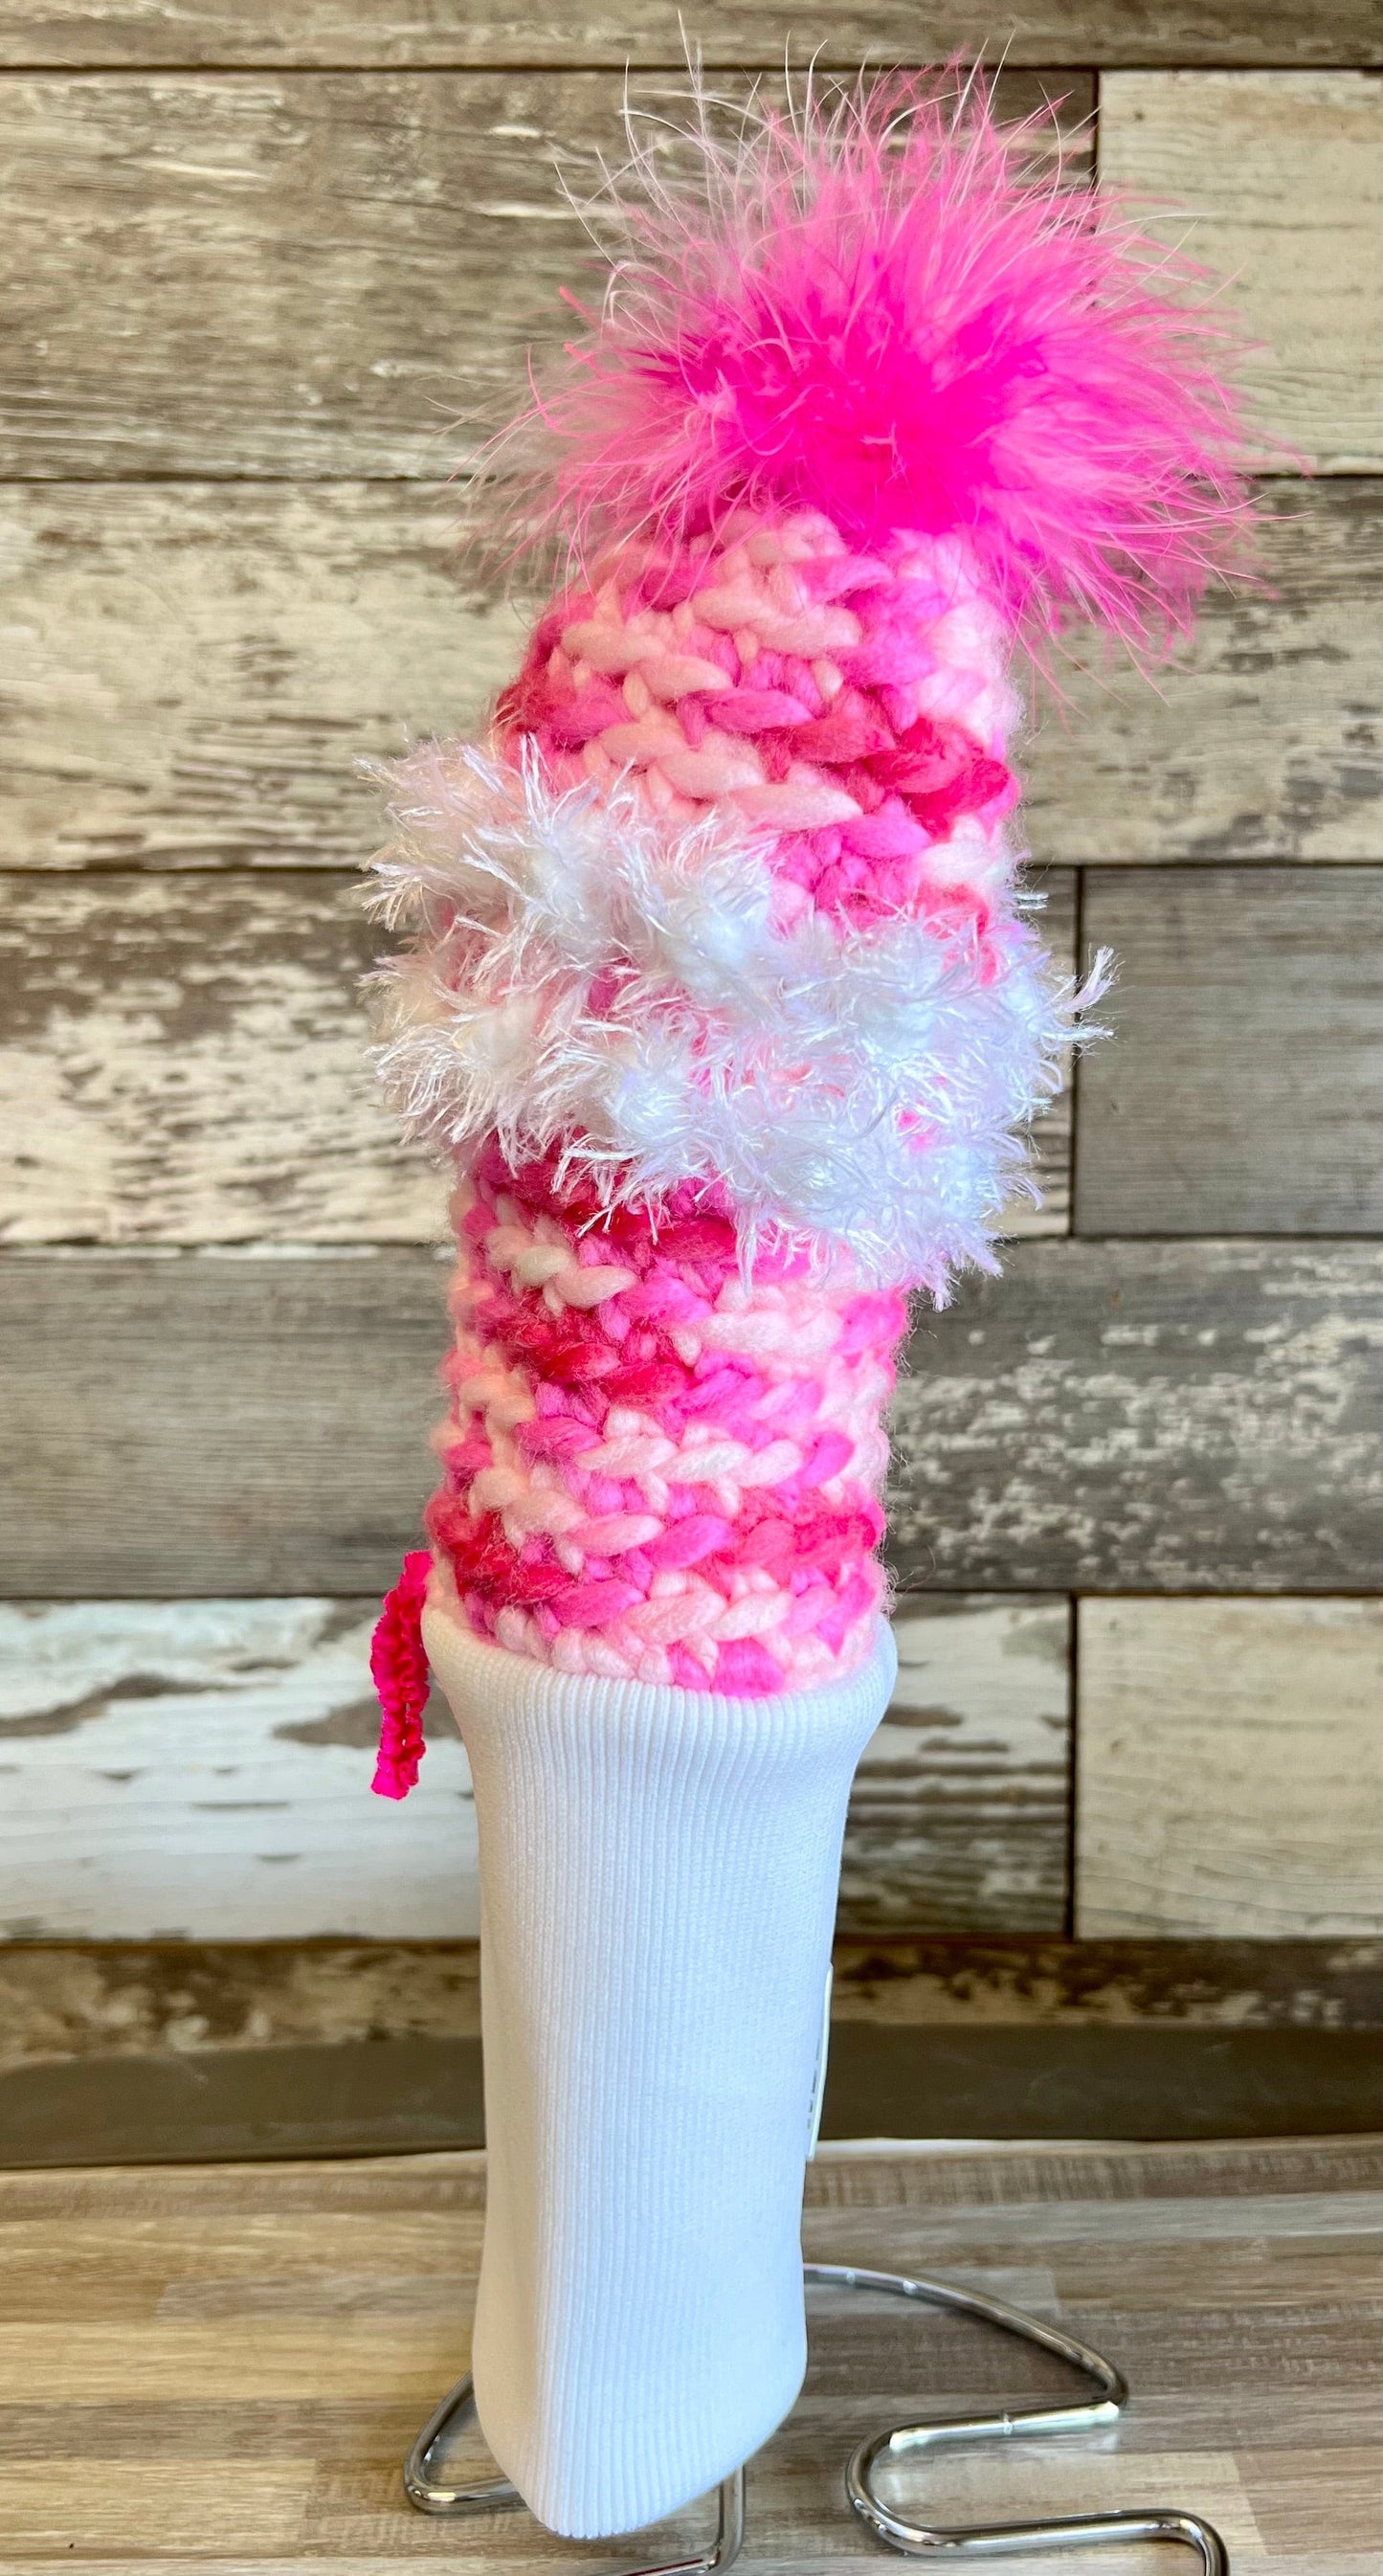 Handcrafted amazing Love Headcovers